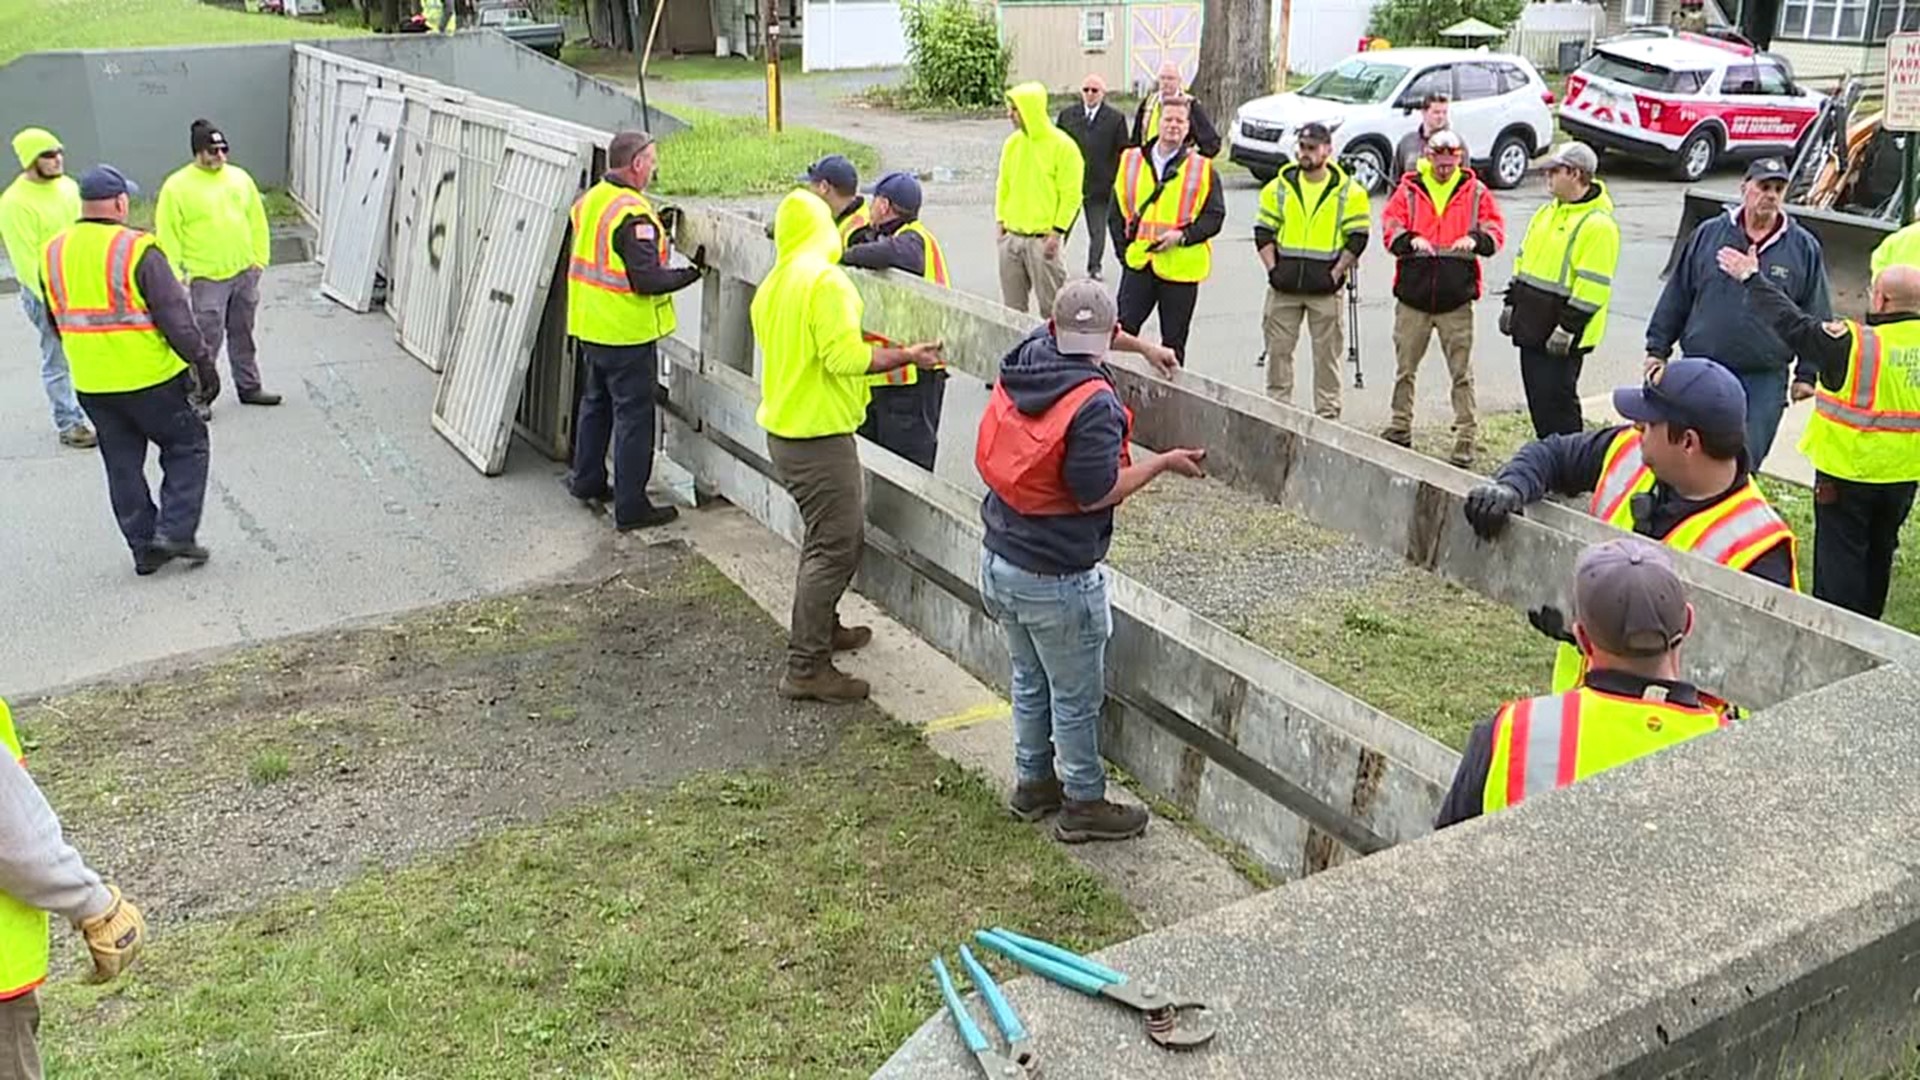 WBFD and DPW workers practiced installing a portable section of a levee that protects 280 homes and businesses in the event of a flooded Susquehanna River.